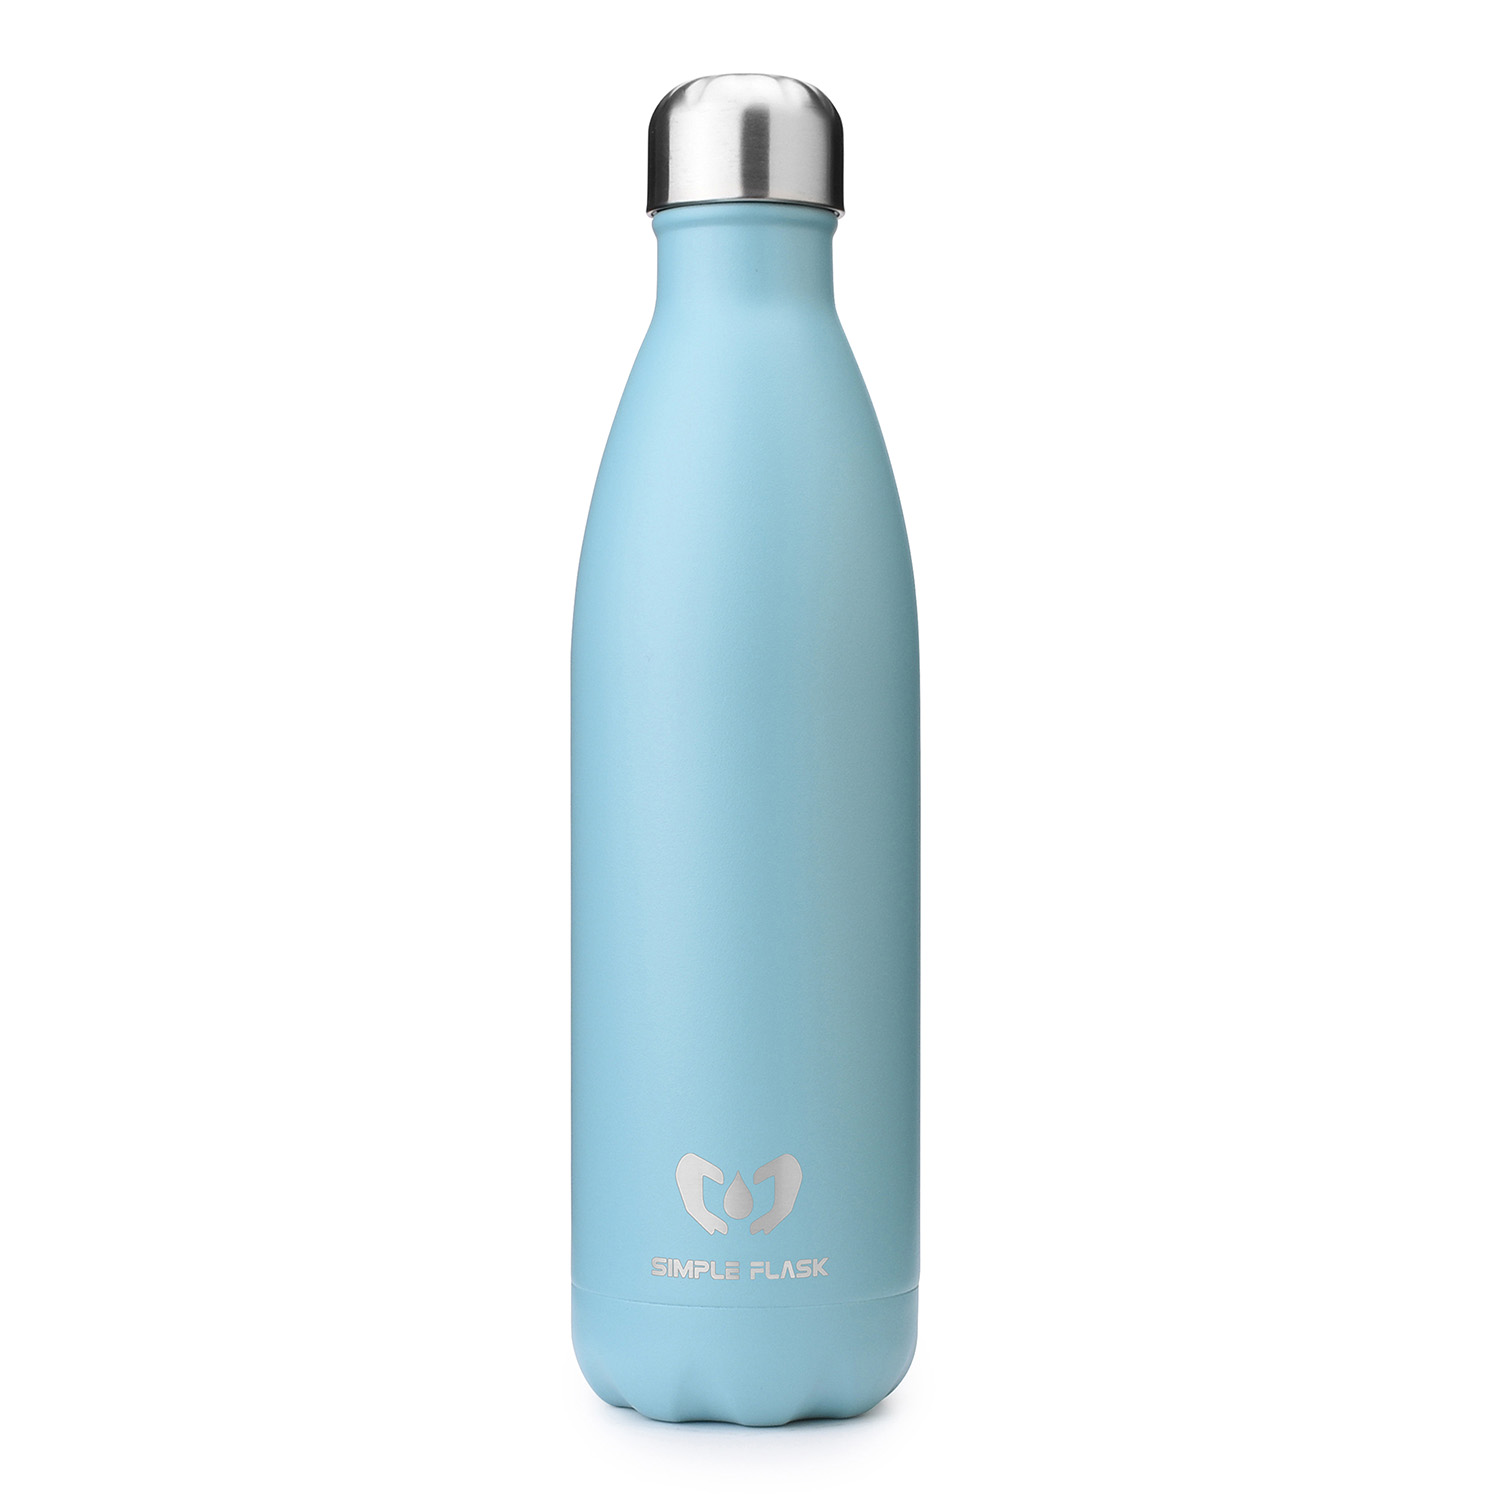 https://www.simpleflask.com/wp-content/uploads/2020/10/simple-flask-insulated-water-bottle-17oz-sky-blue-1.jpg